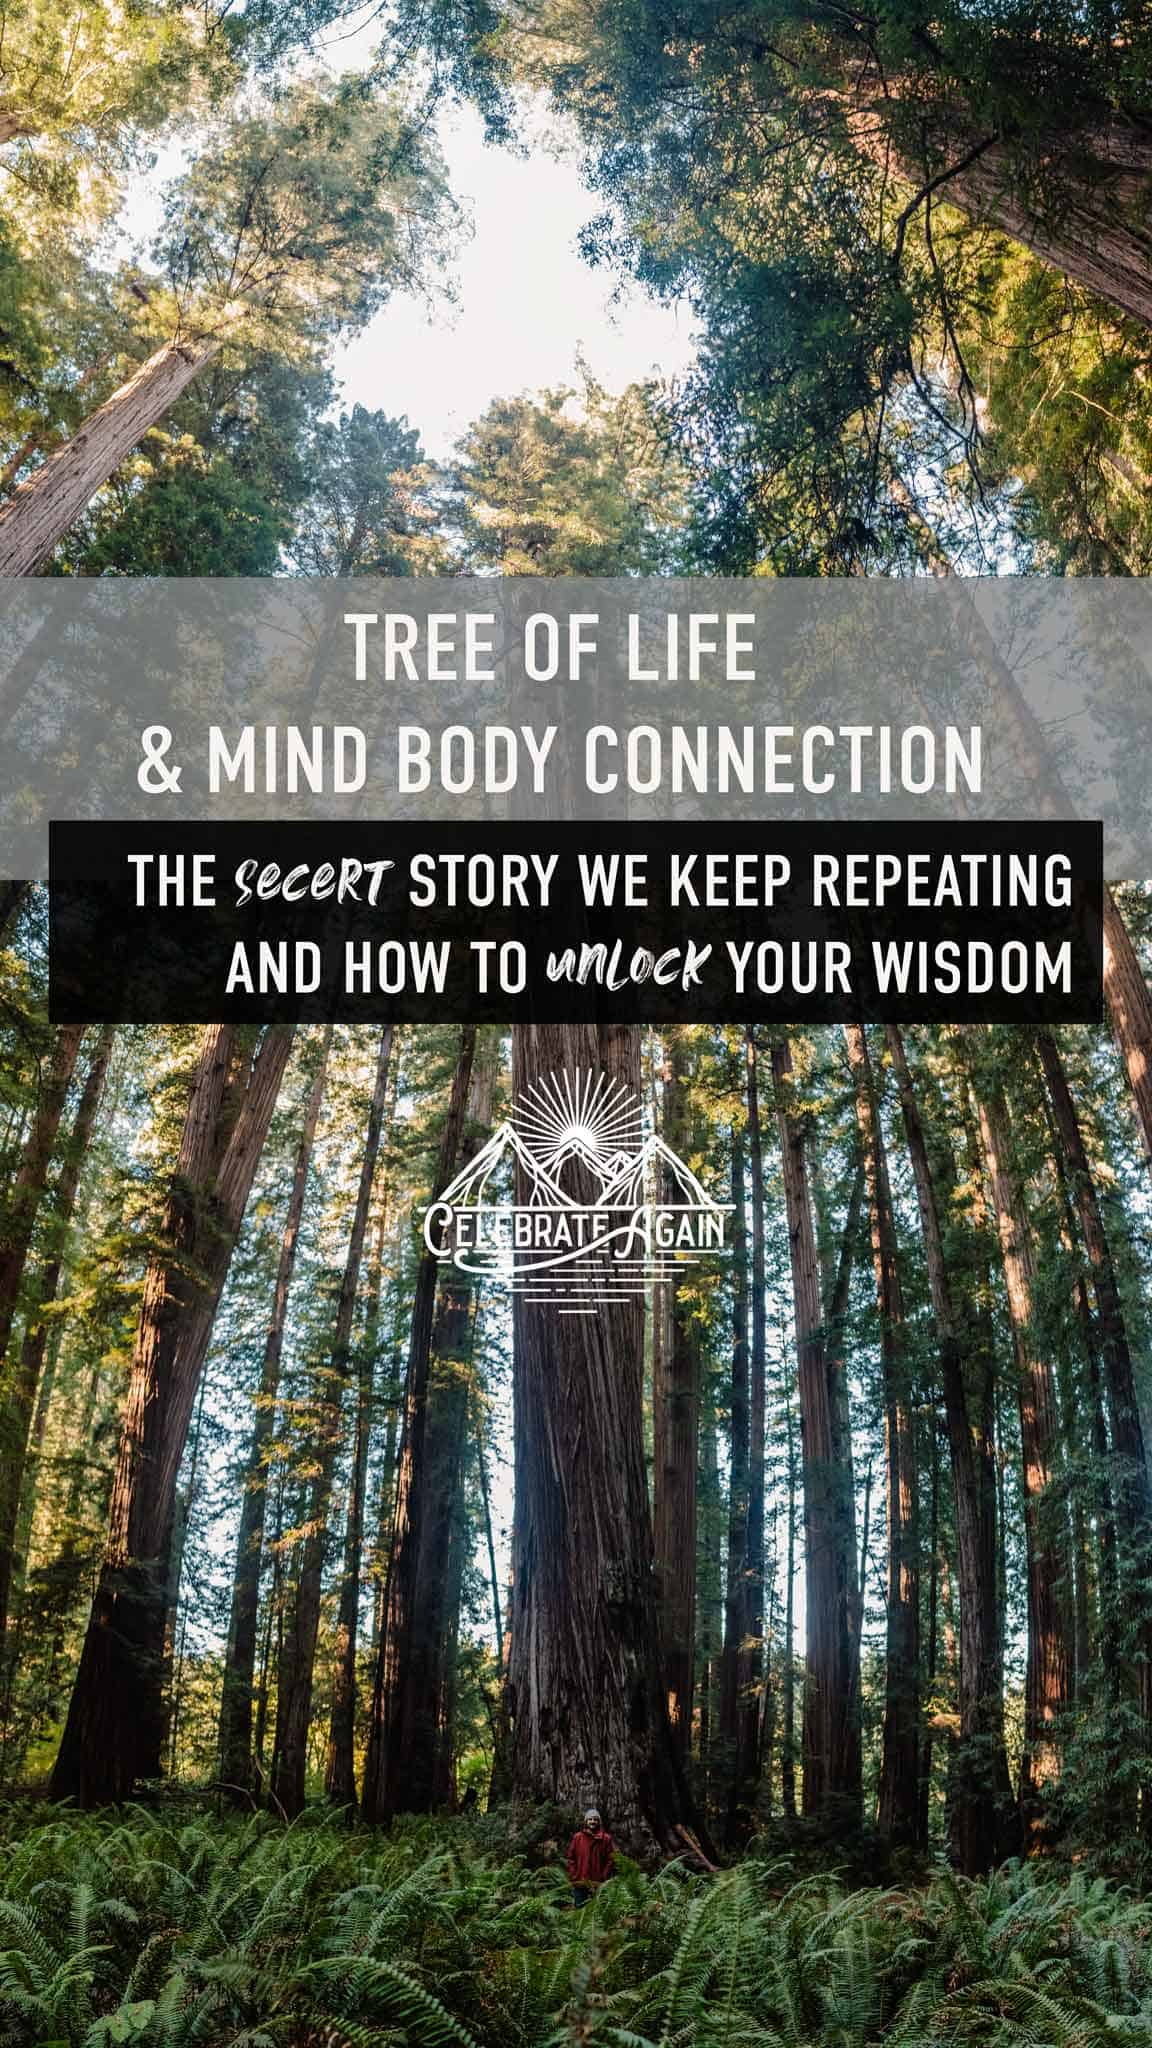 tree of life and mind body connection the secert story we keep repeating and how to unlock your wisdom over image of trees